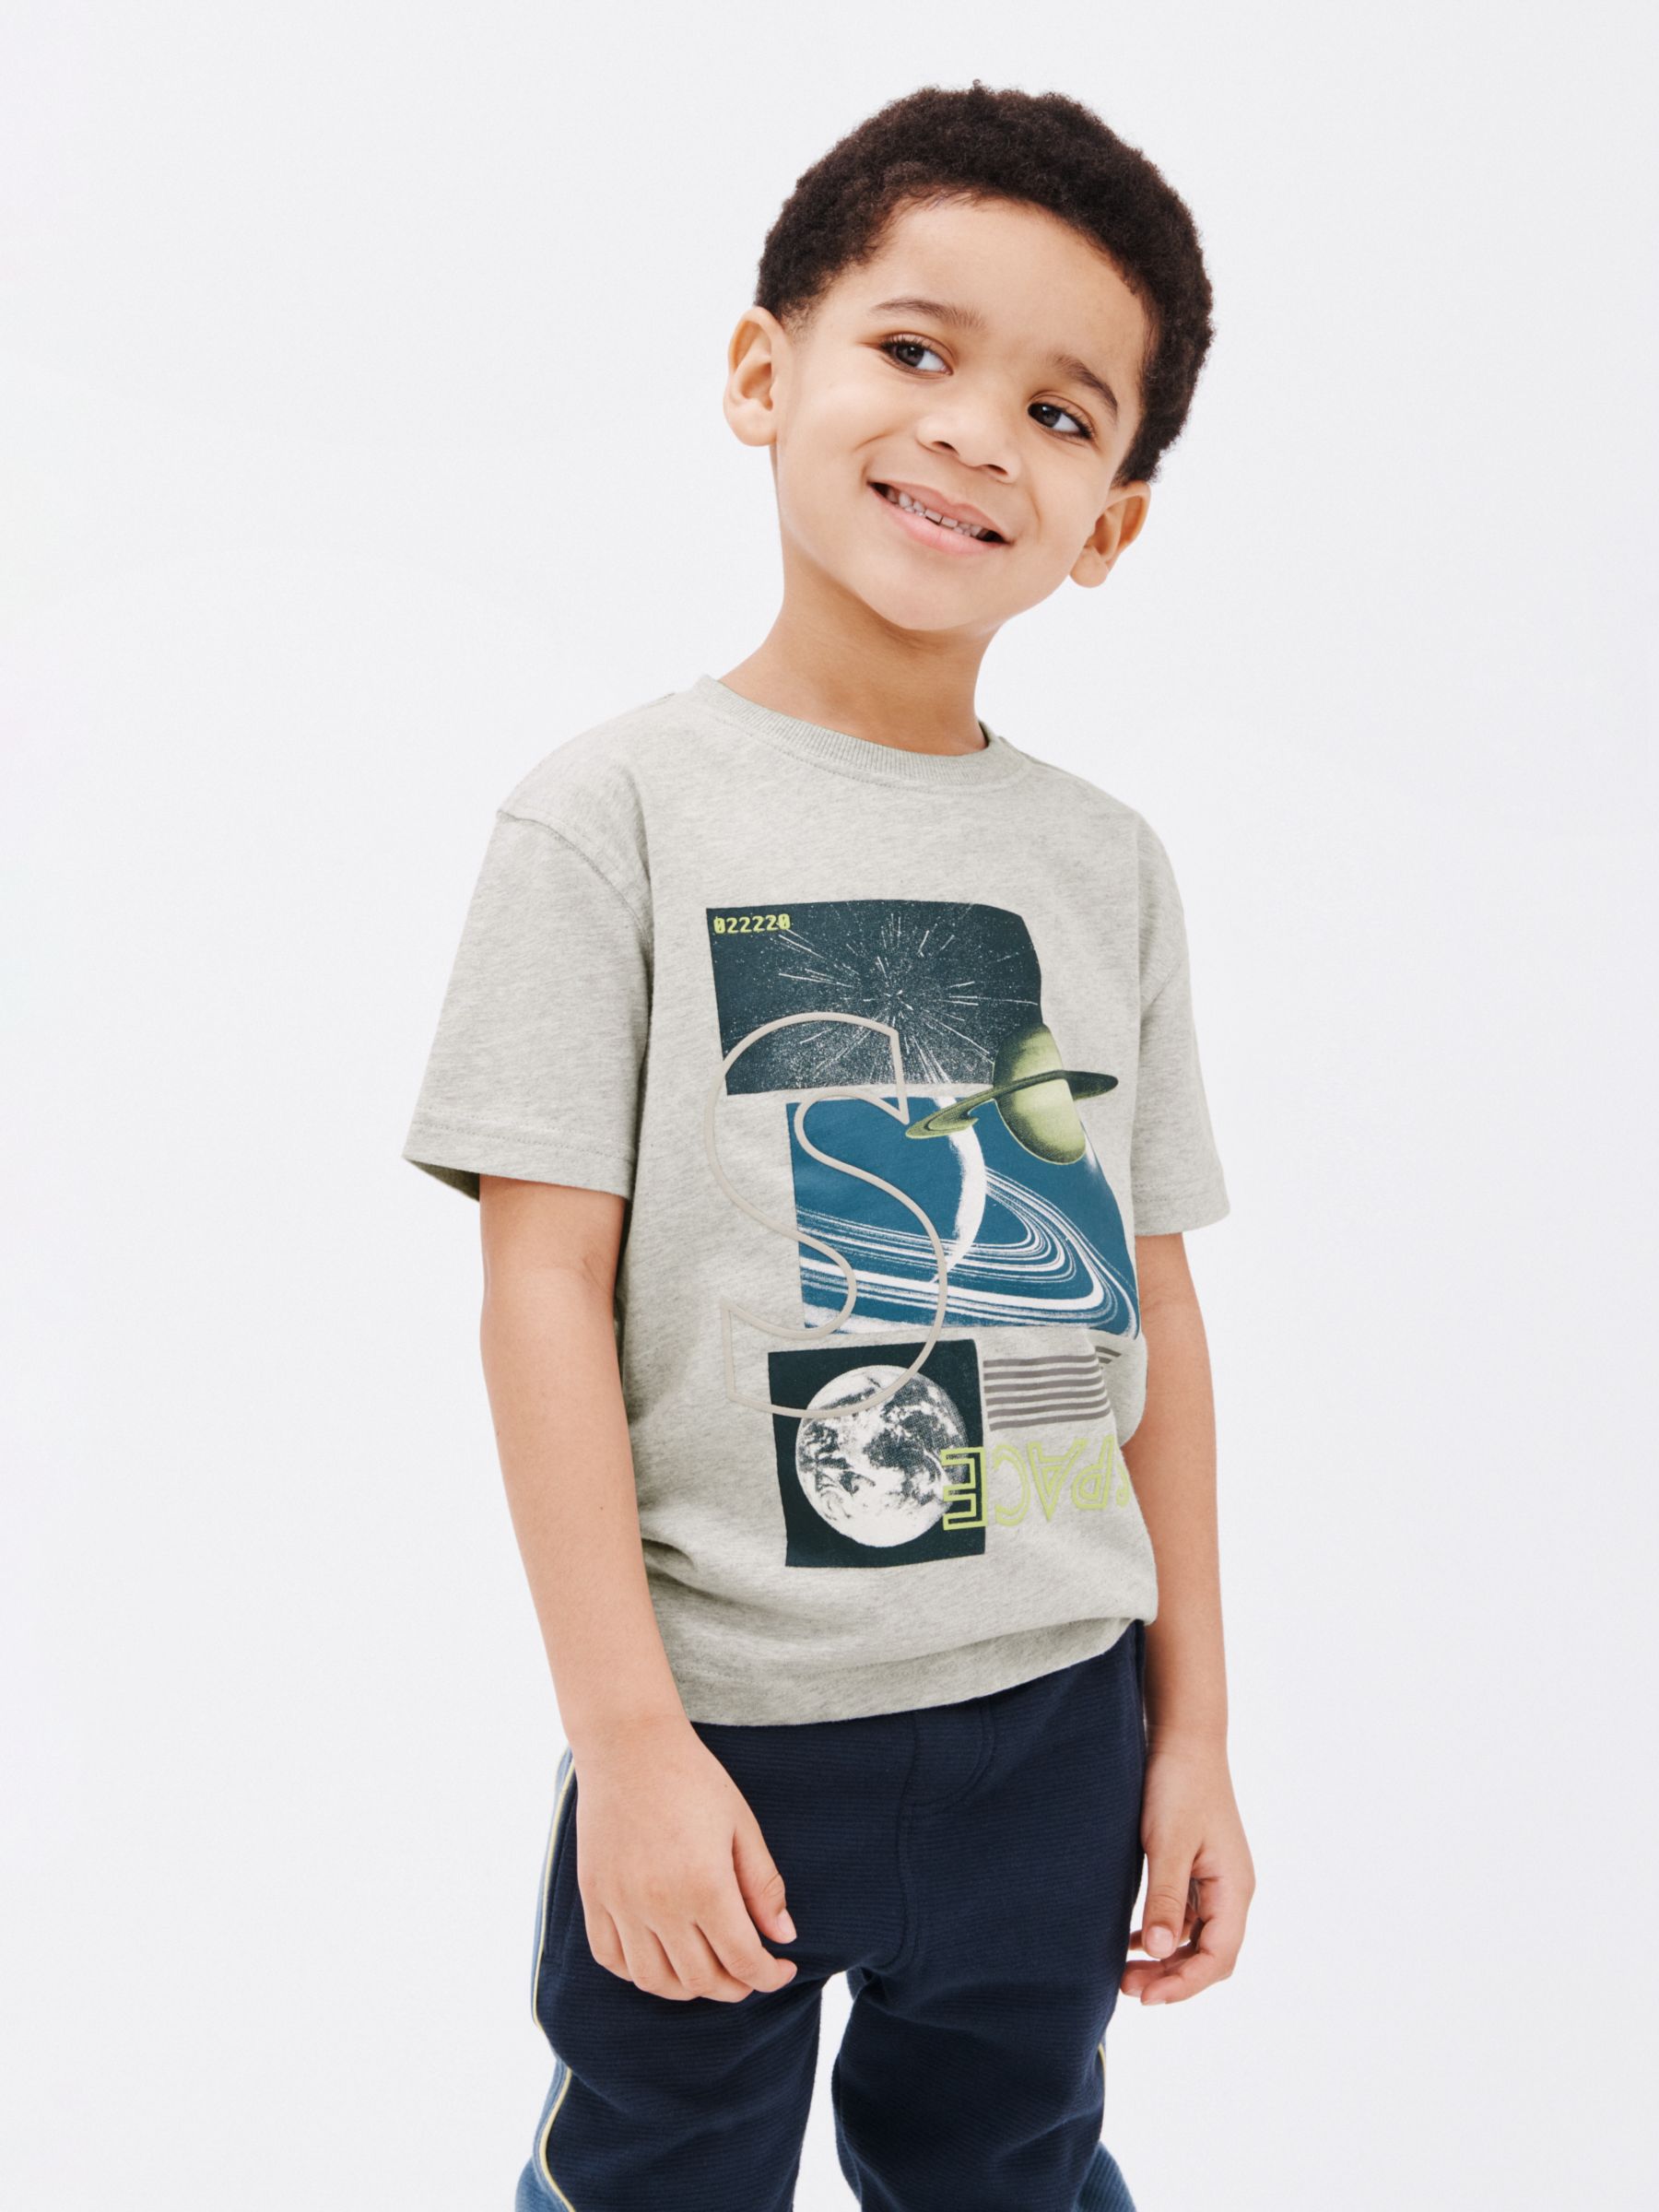 Space Themed Shirts | John Lewis & Partners